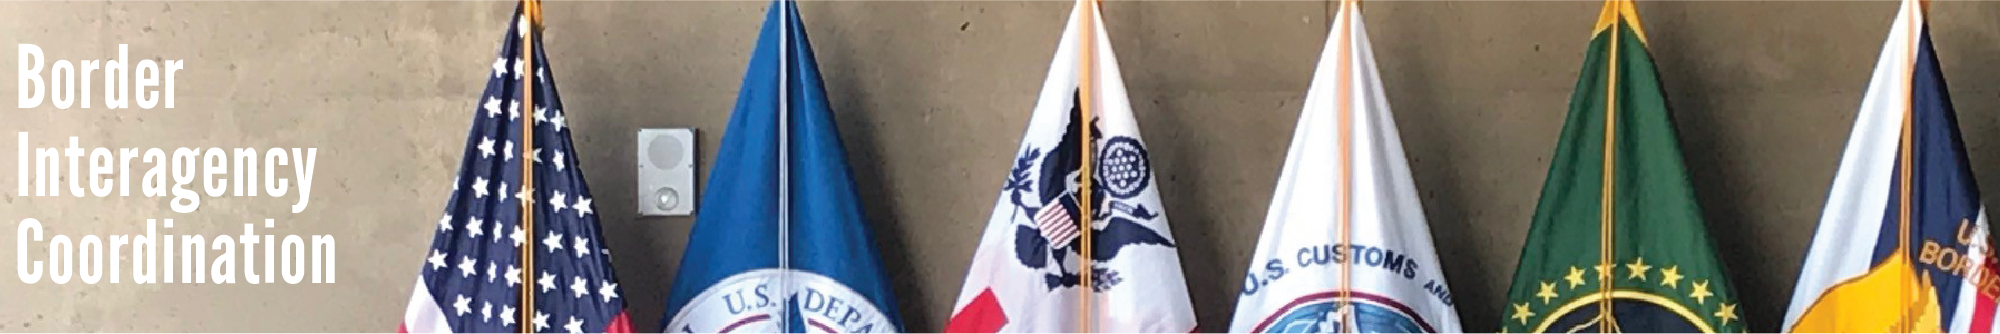 border-interagency-coordination-banner_rearview.png